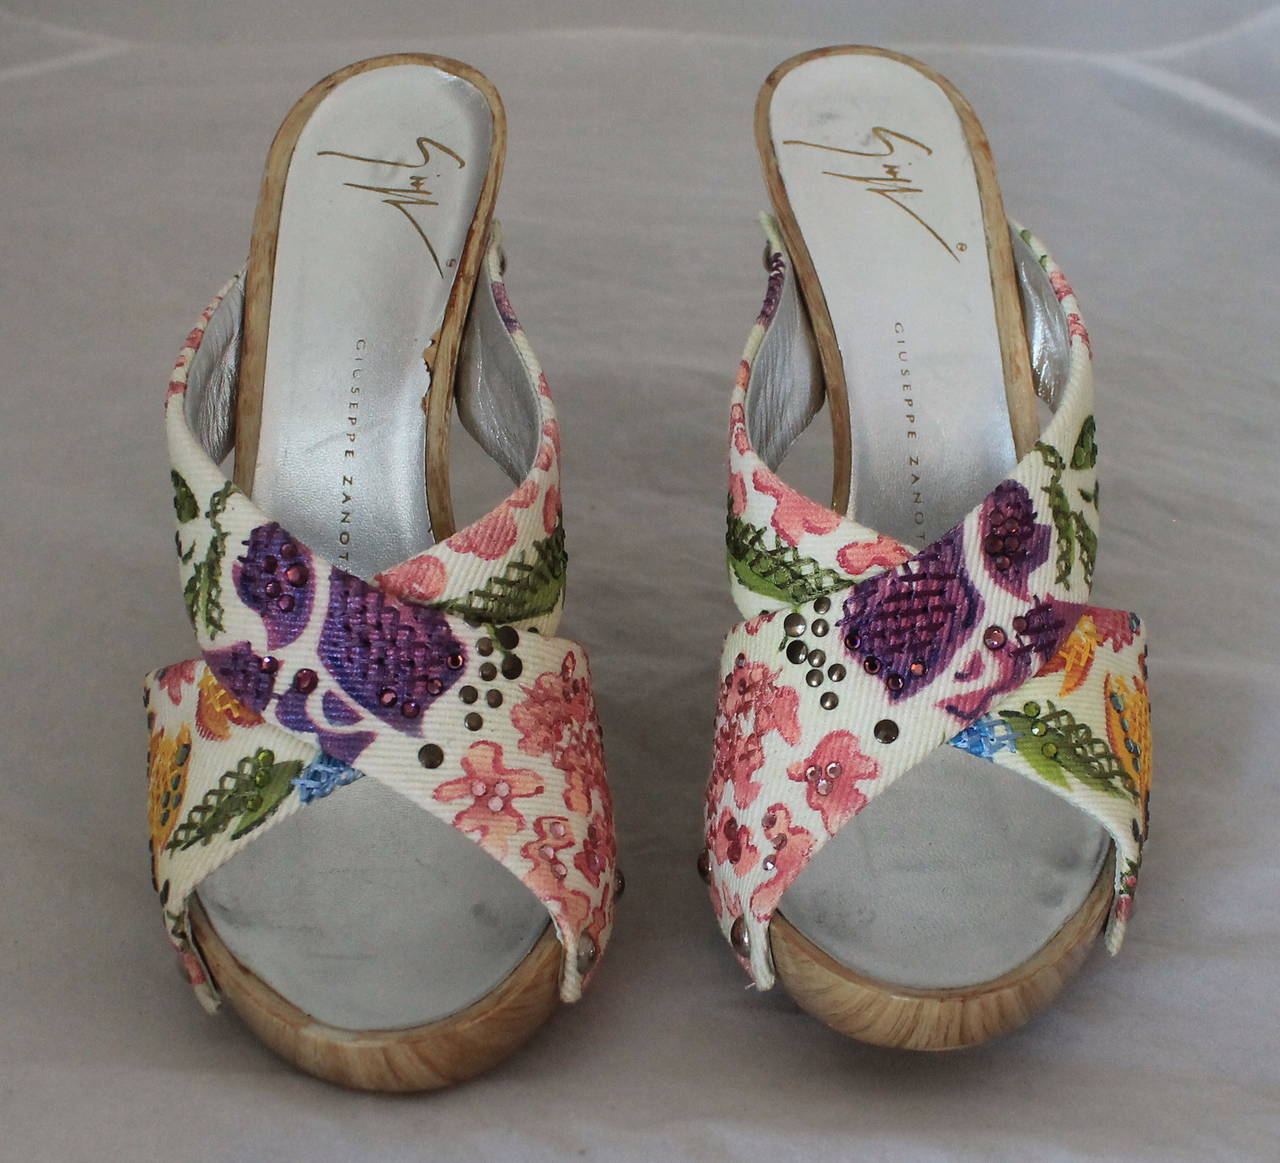 Giuseppe Zanotti Floral Print Rhinestone Wedges - 35. These wedges are in very good condition with some wear on the bottom. The wedge has a wooden look to it but is a plastic material.